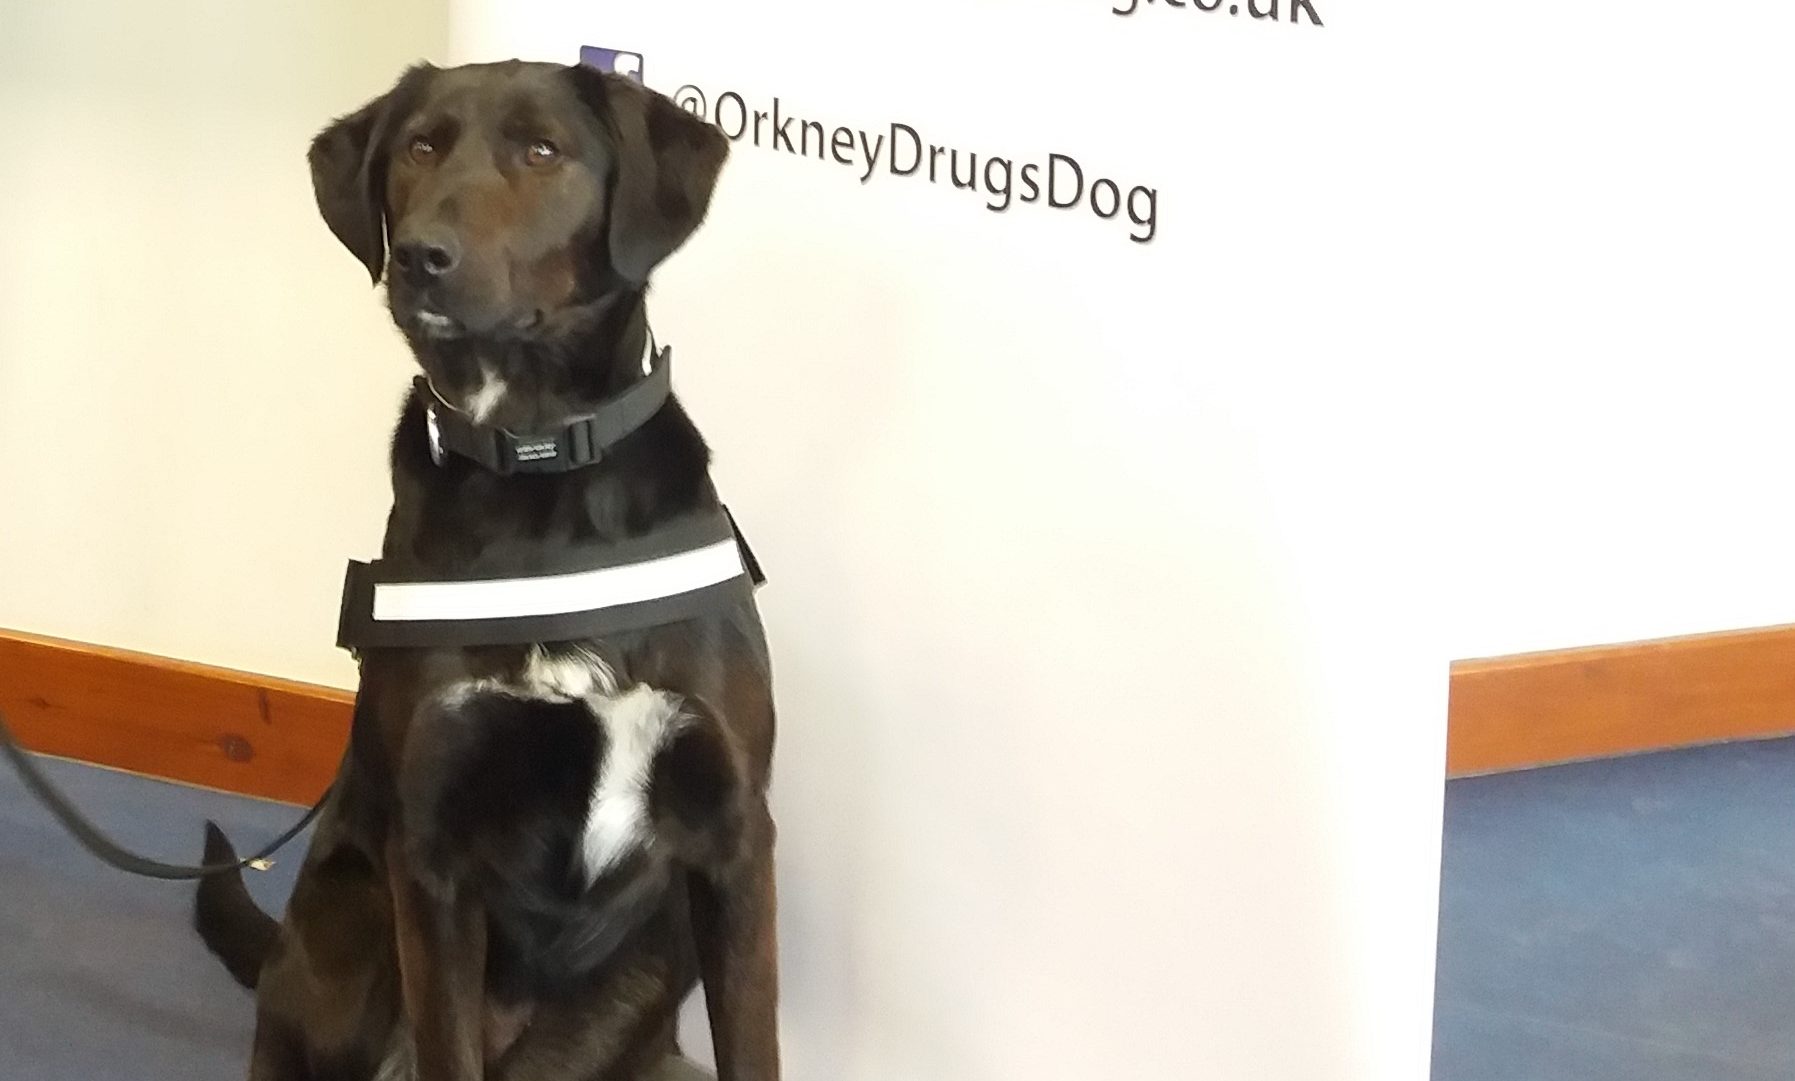 Zoe will be the islands' first drugs detection dog.